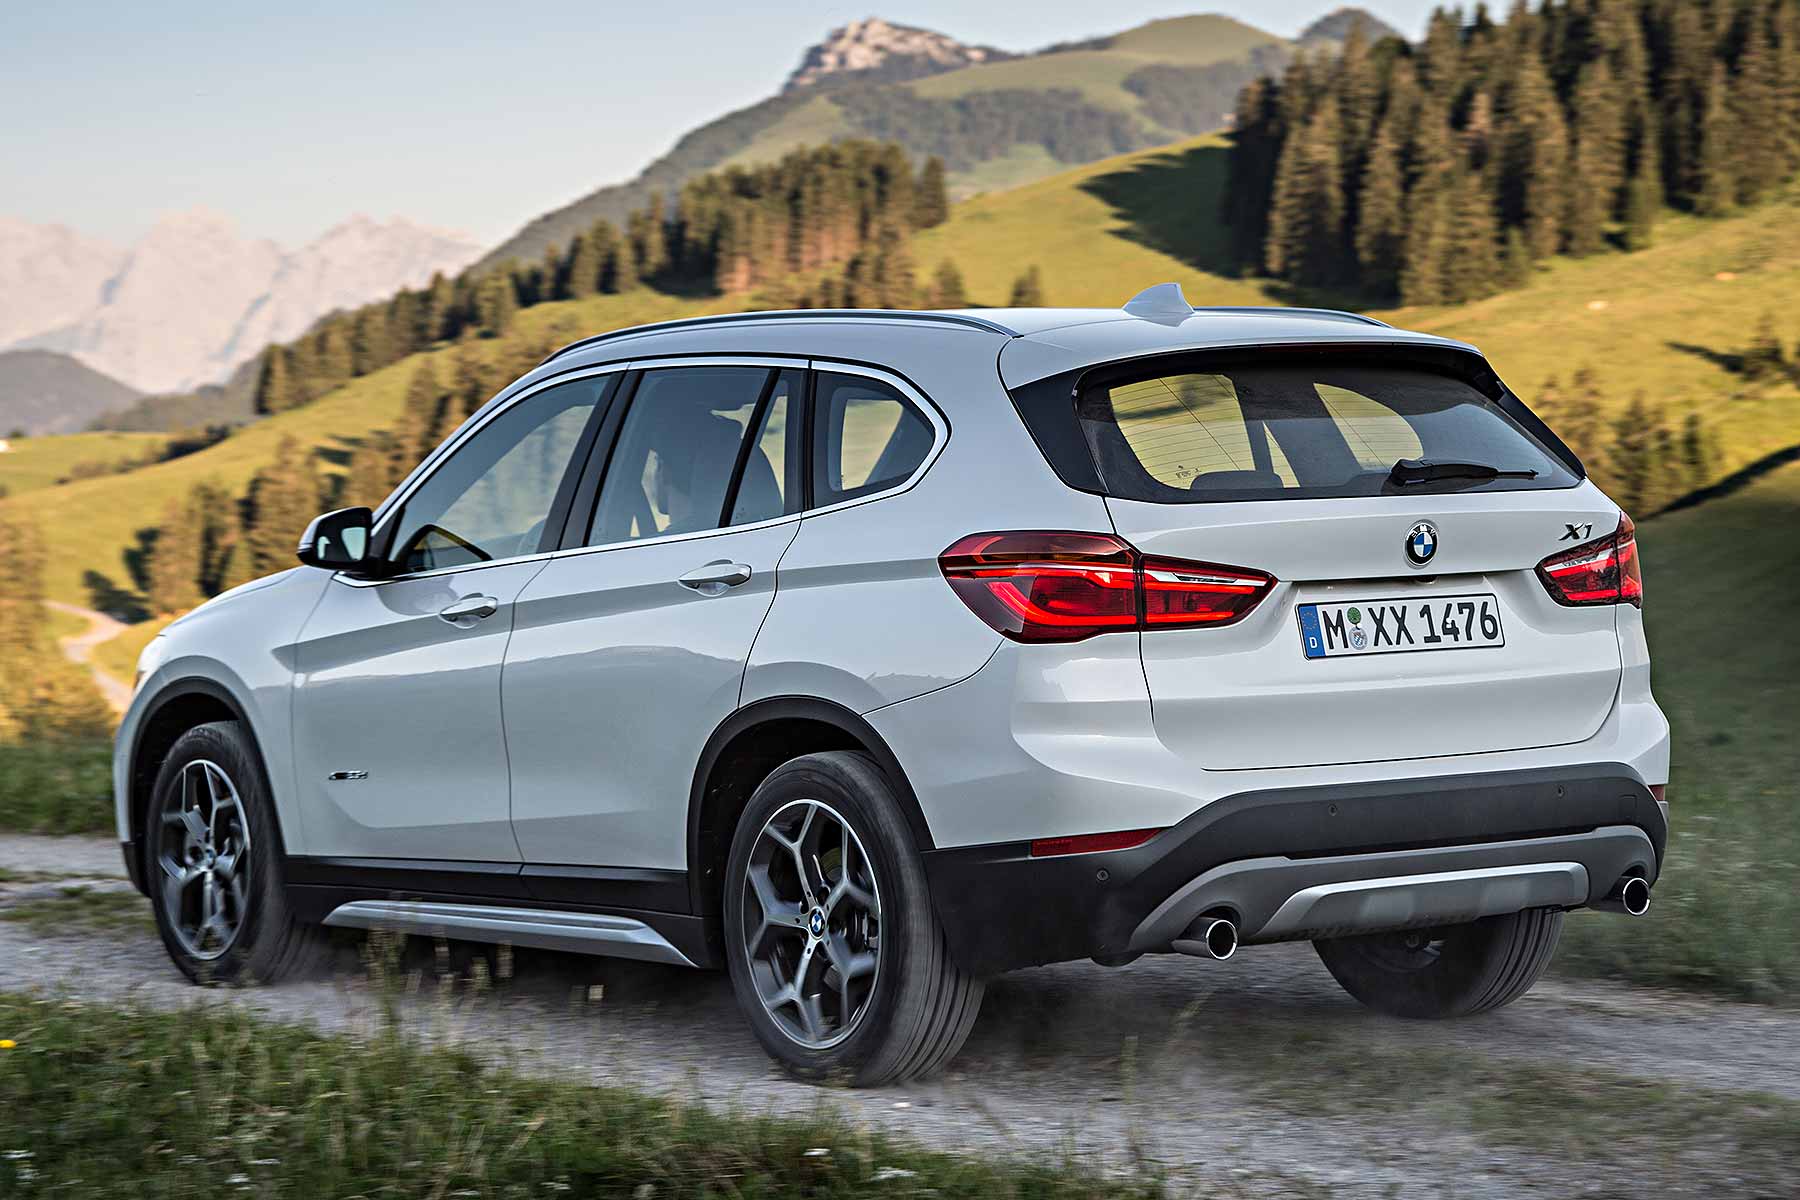 bmw-x1-review-2015-first-drive-motoring-research